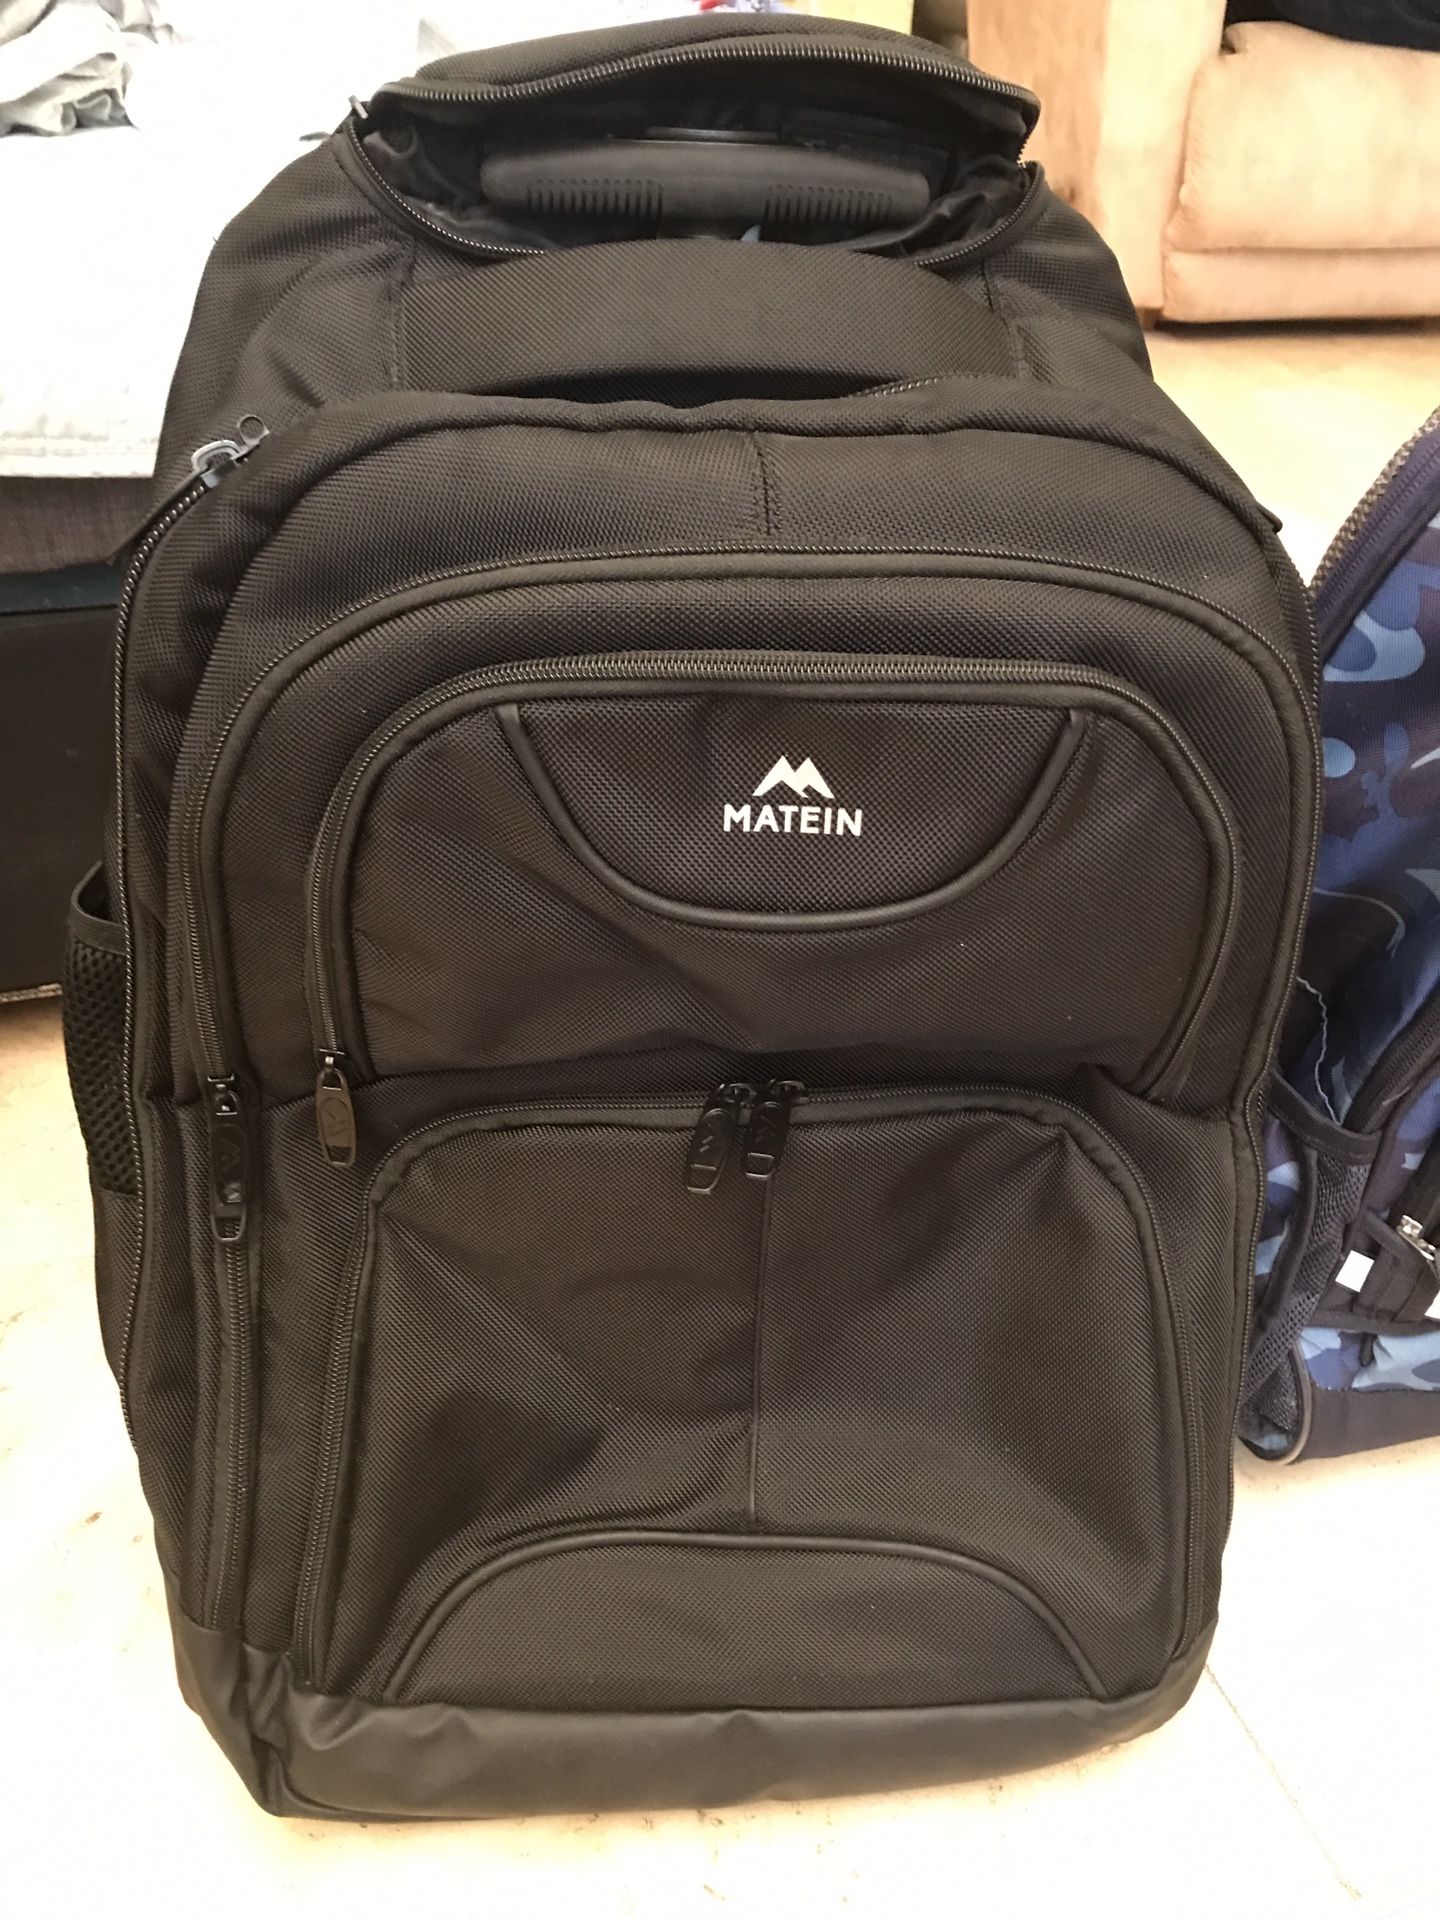 Rolling Backpack - Used